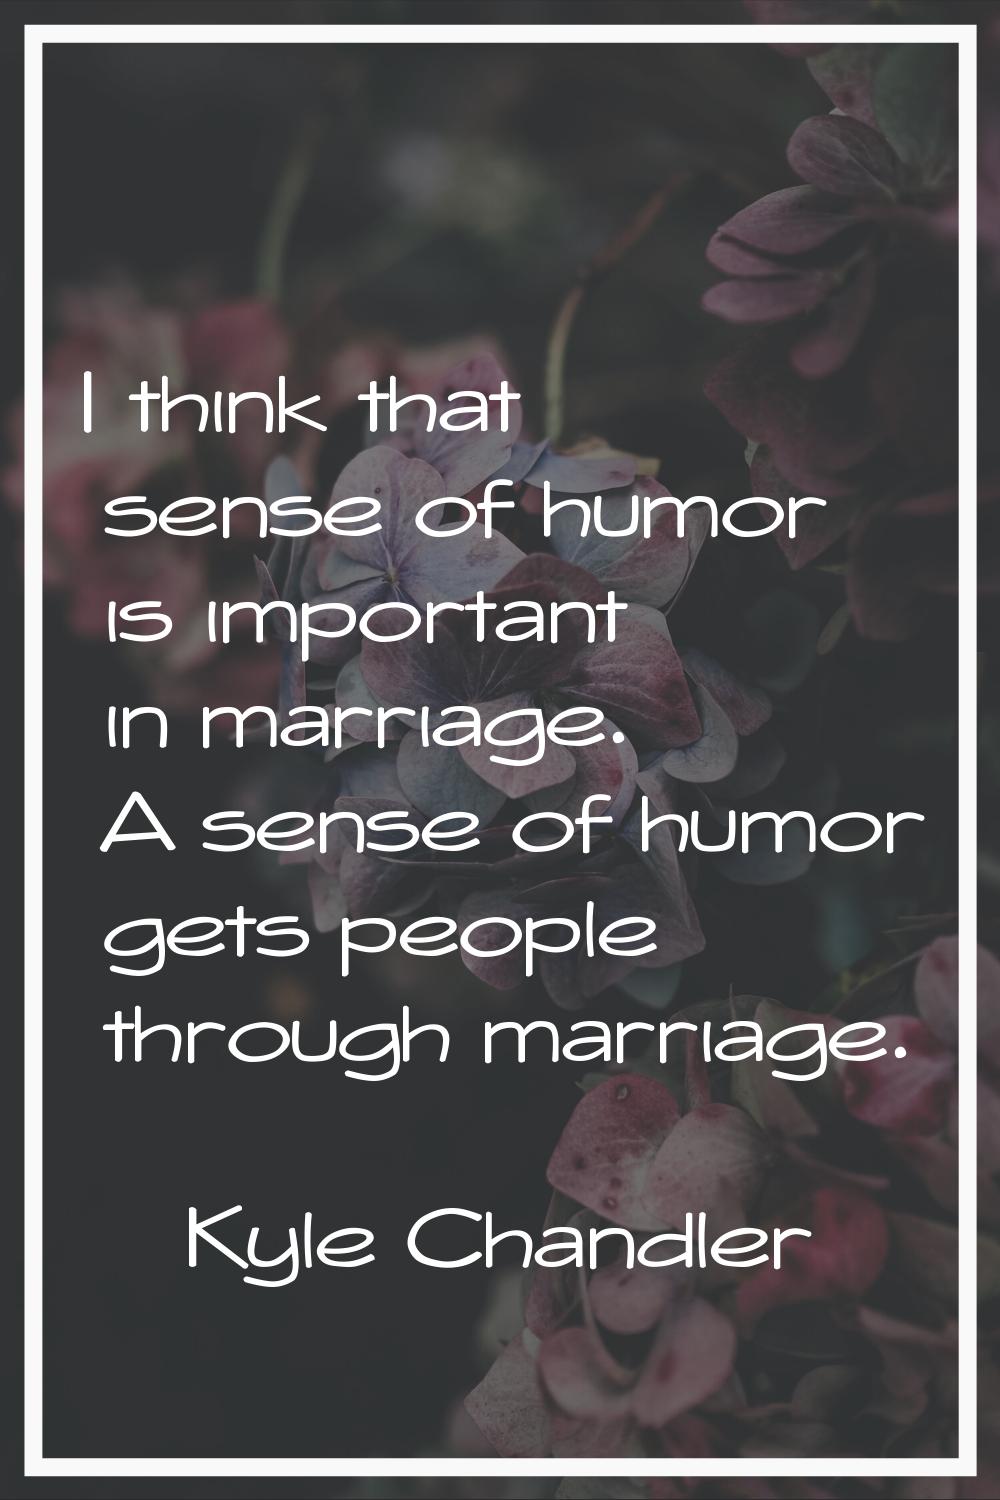 I think that sense of humor is important in marriage. A sense of humor gets people through marriage